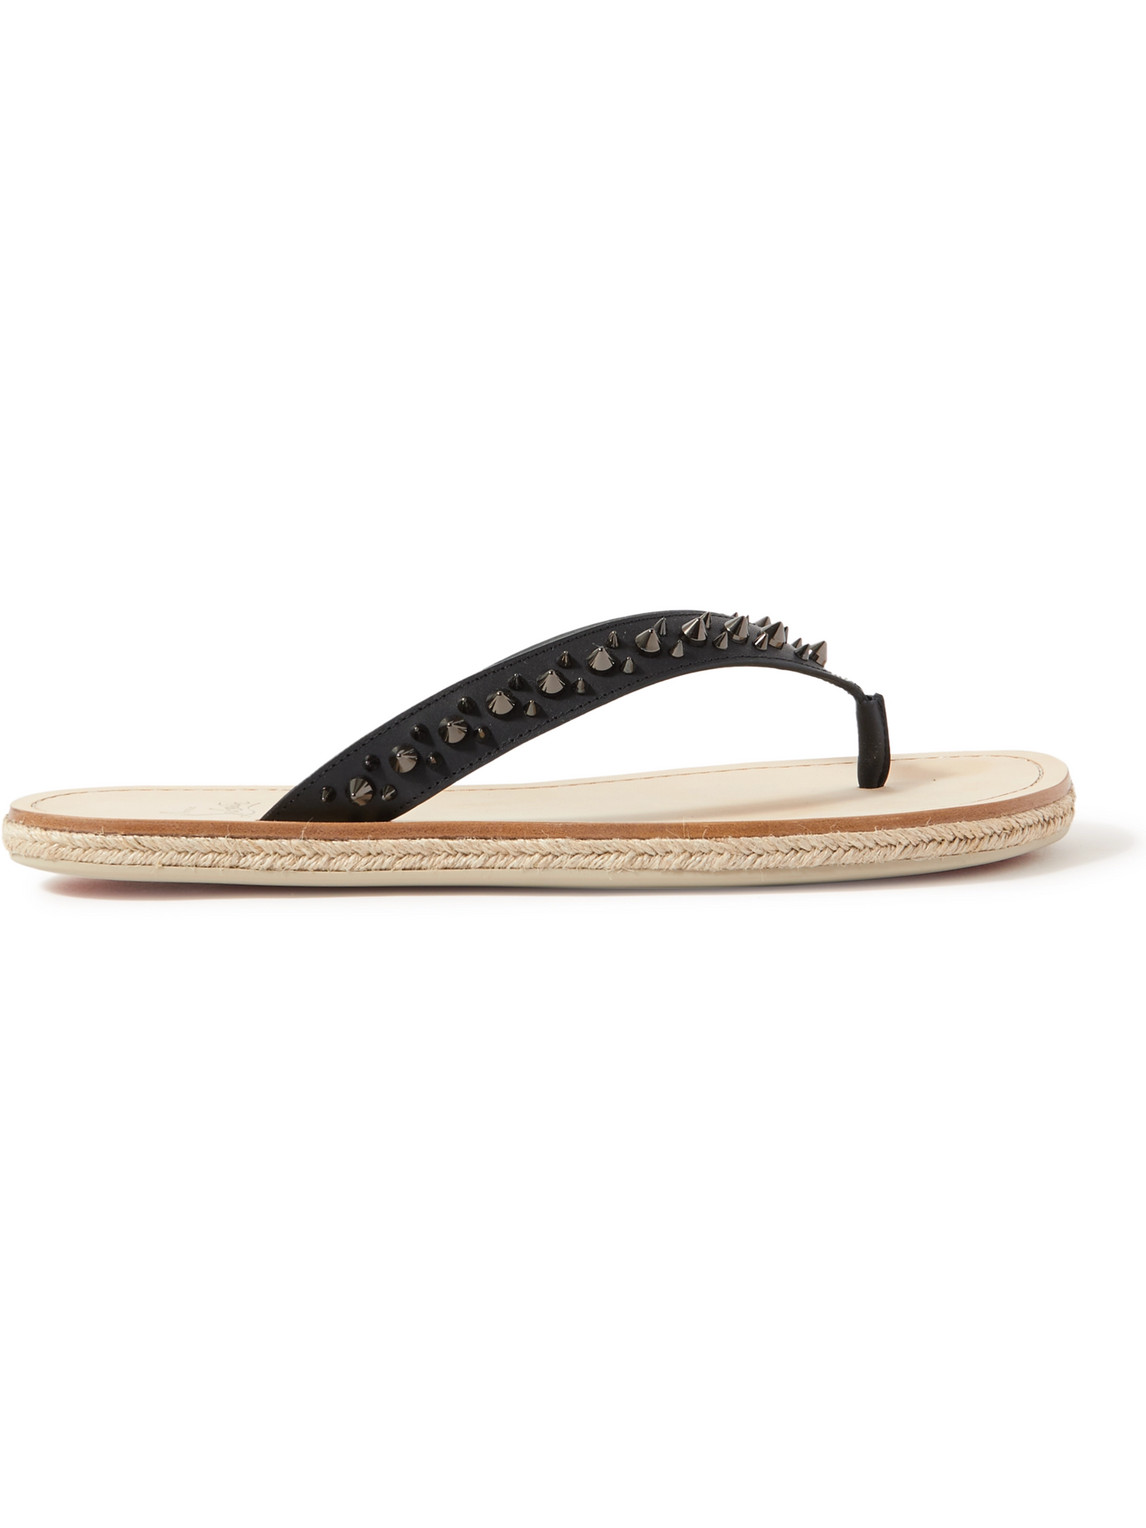 Pyraclobis Spiked Leather Flip Flops